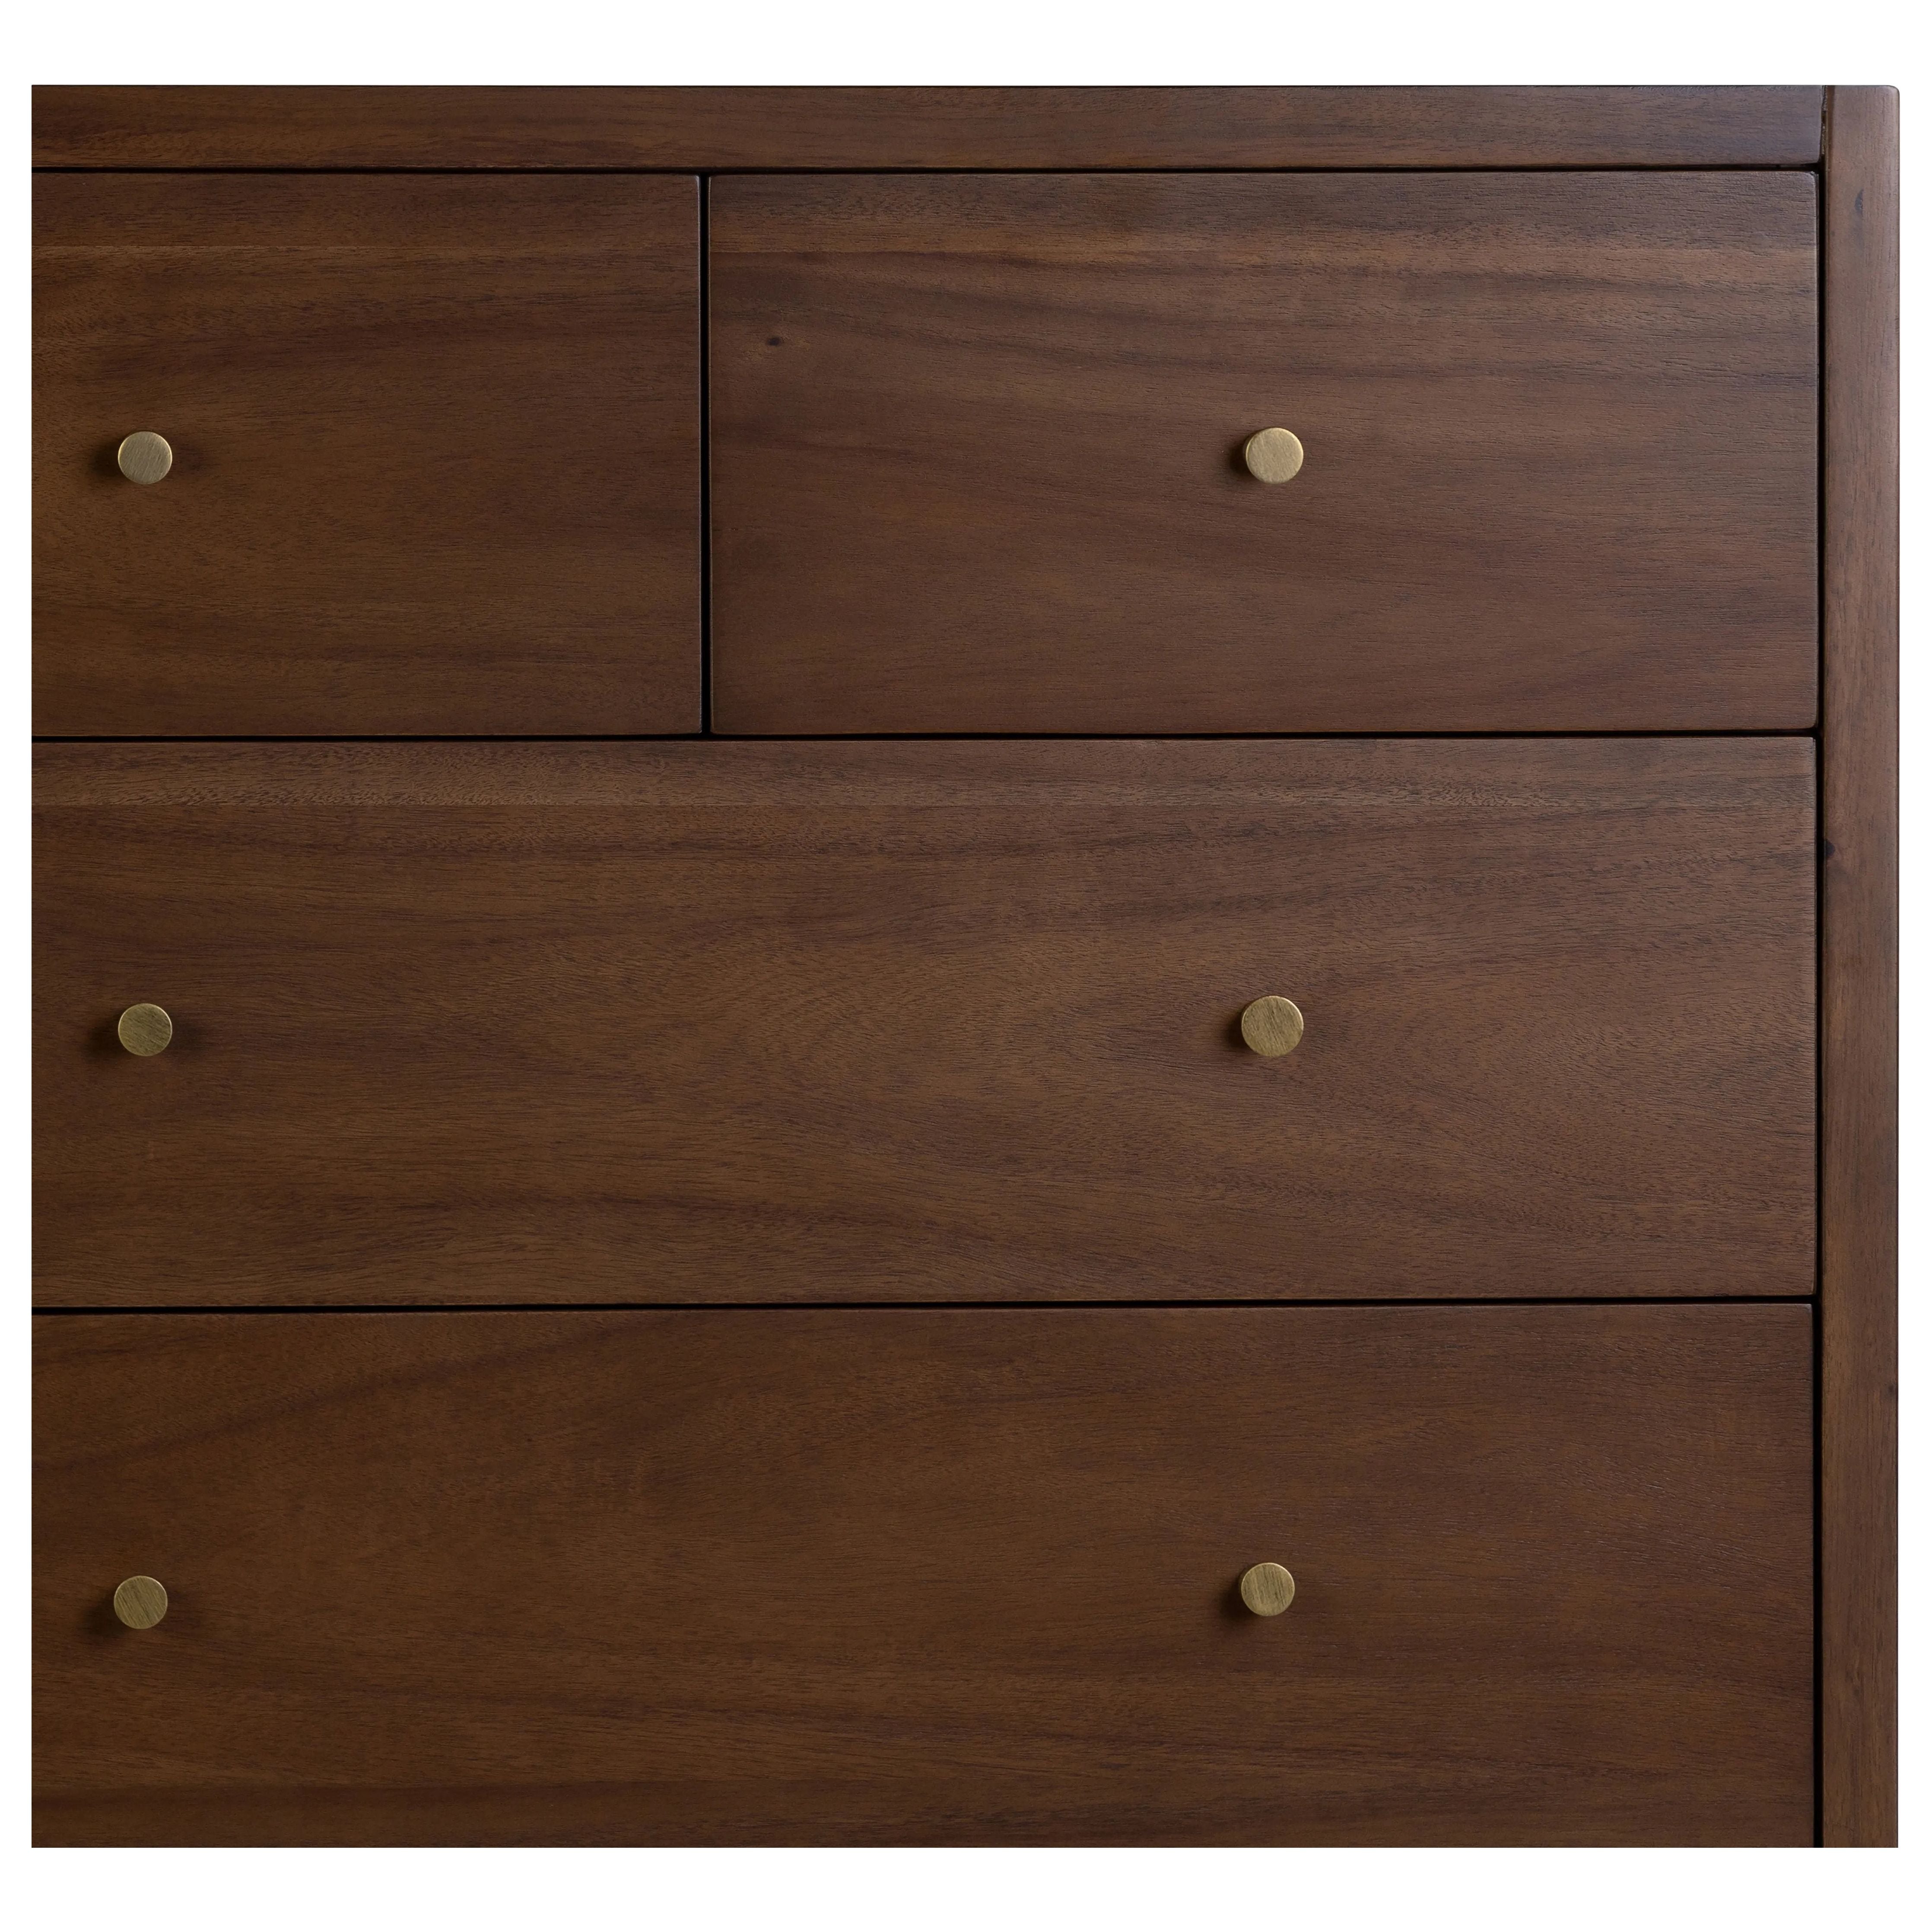 A simple, heavy wood Parsons-style dresser with 10 varied sized drawers for ample storage. Finished in solid ash with brass hardware Amethyst Home provides interior design, new home construction design consulting, vintage area rugs, and lighting in the Los Angeles metro area.